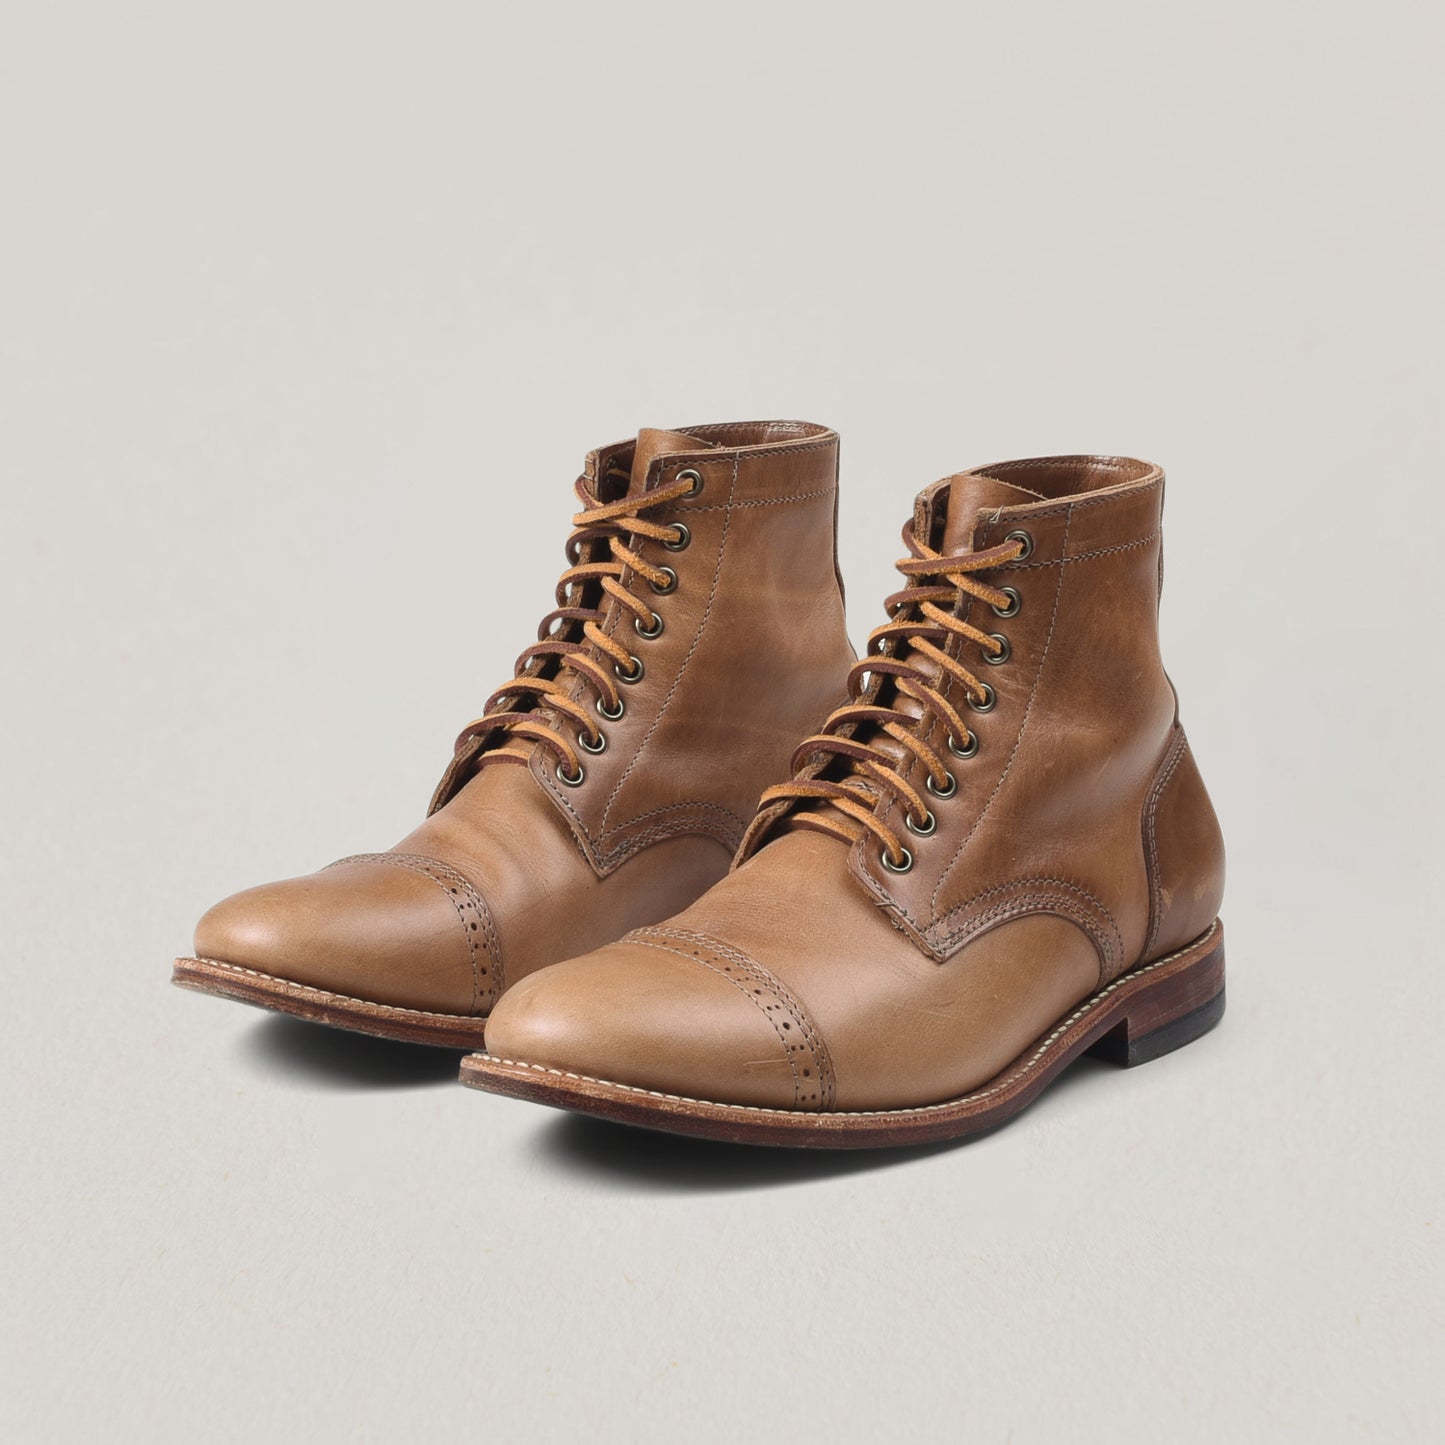 USED OAK STREET BOOTMAKERS CAP-TOE TRENCH BOOT - NATURAL CHROMEXCEL